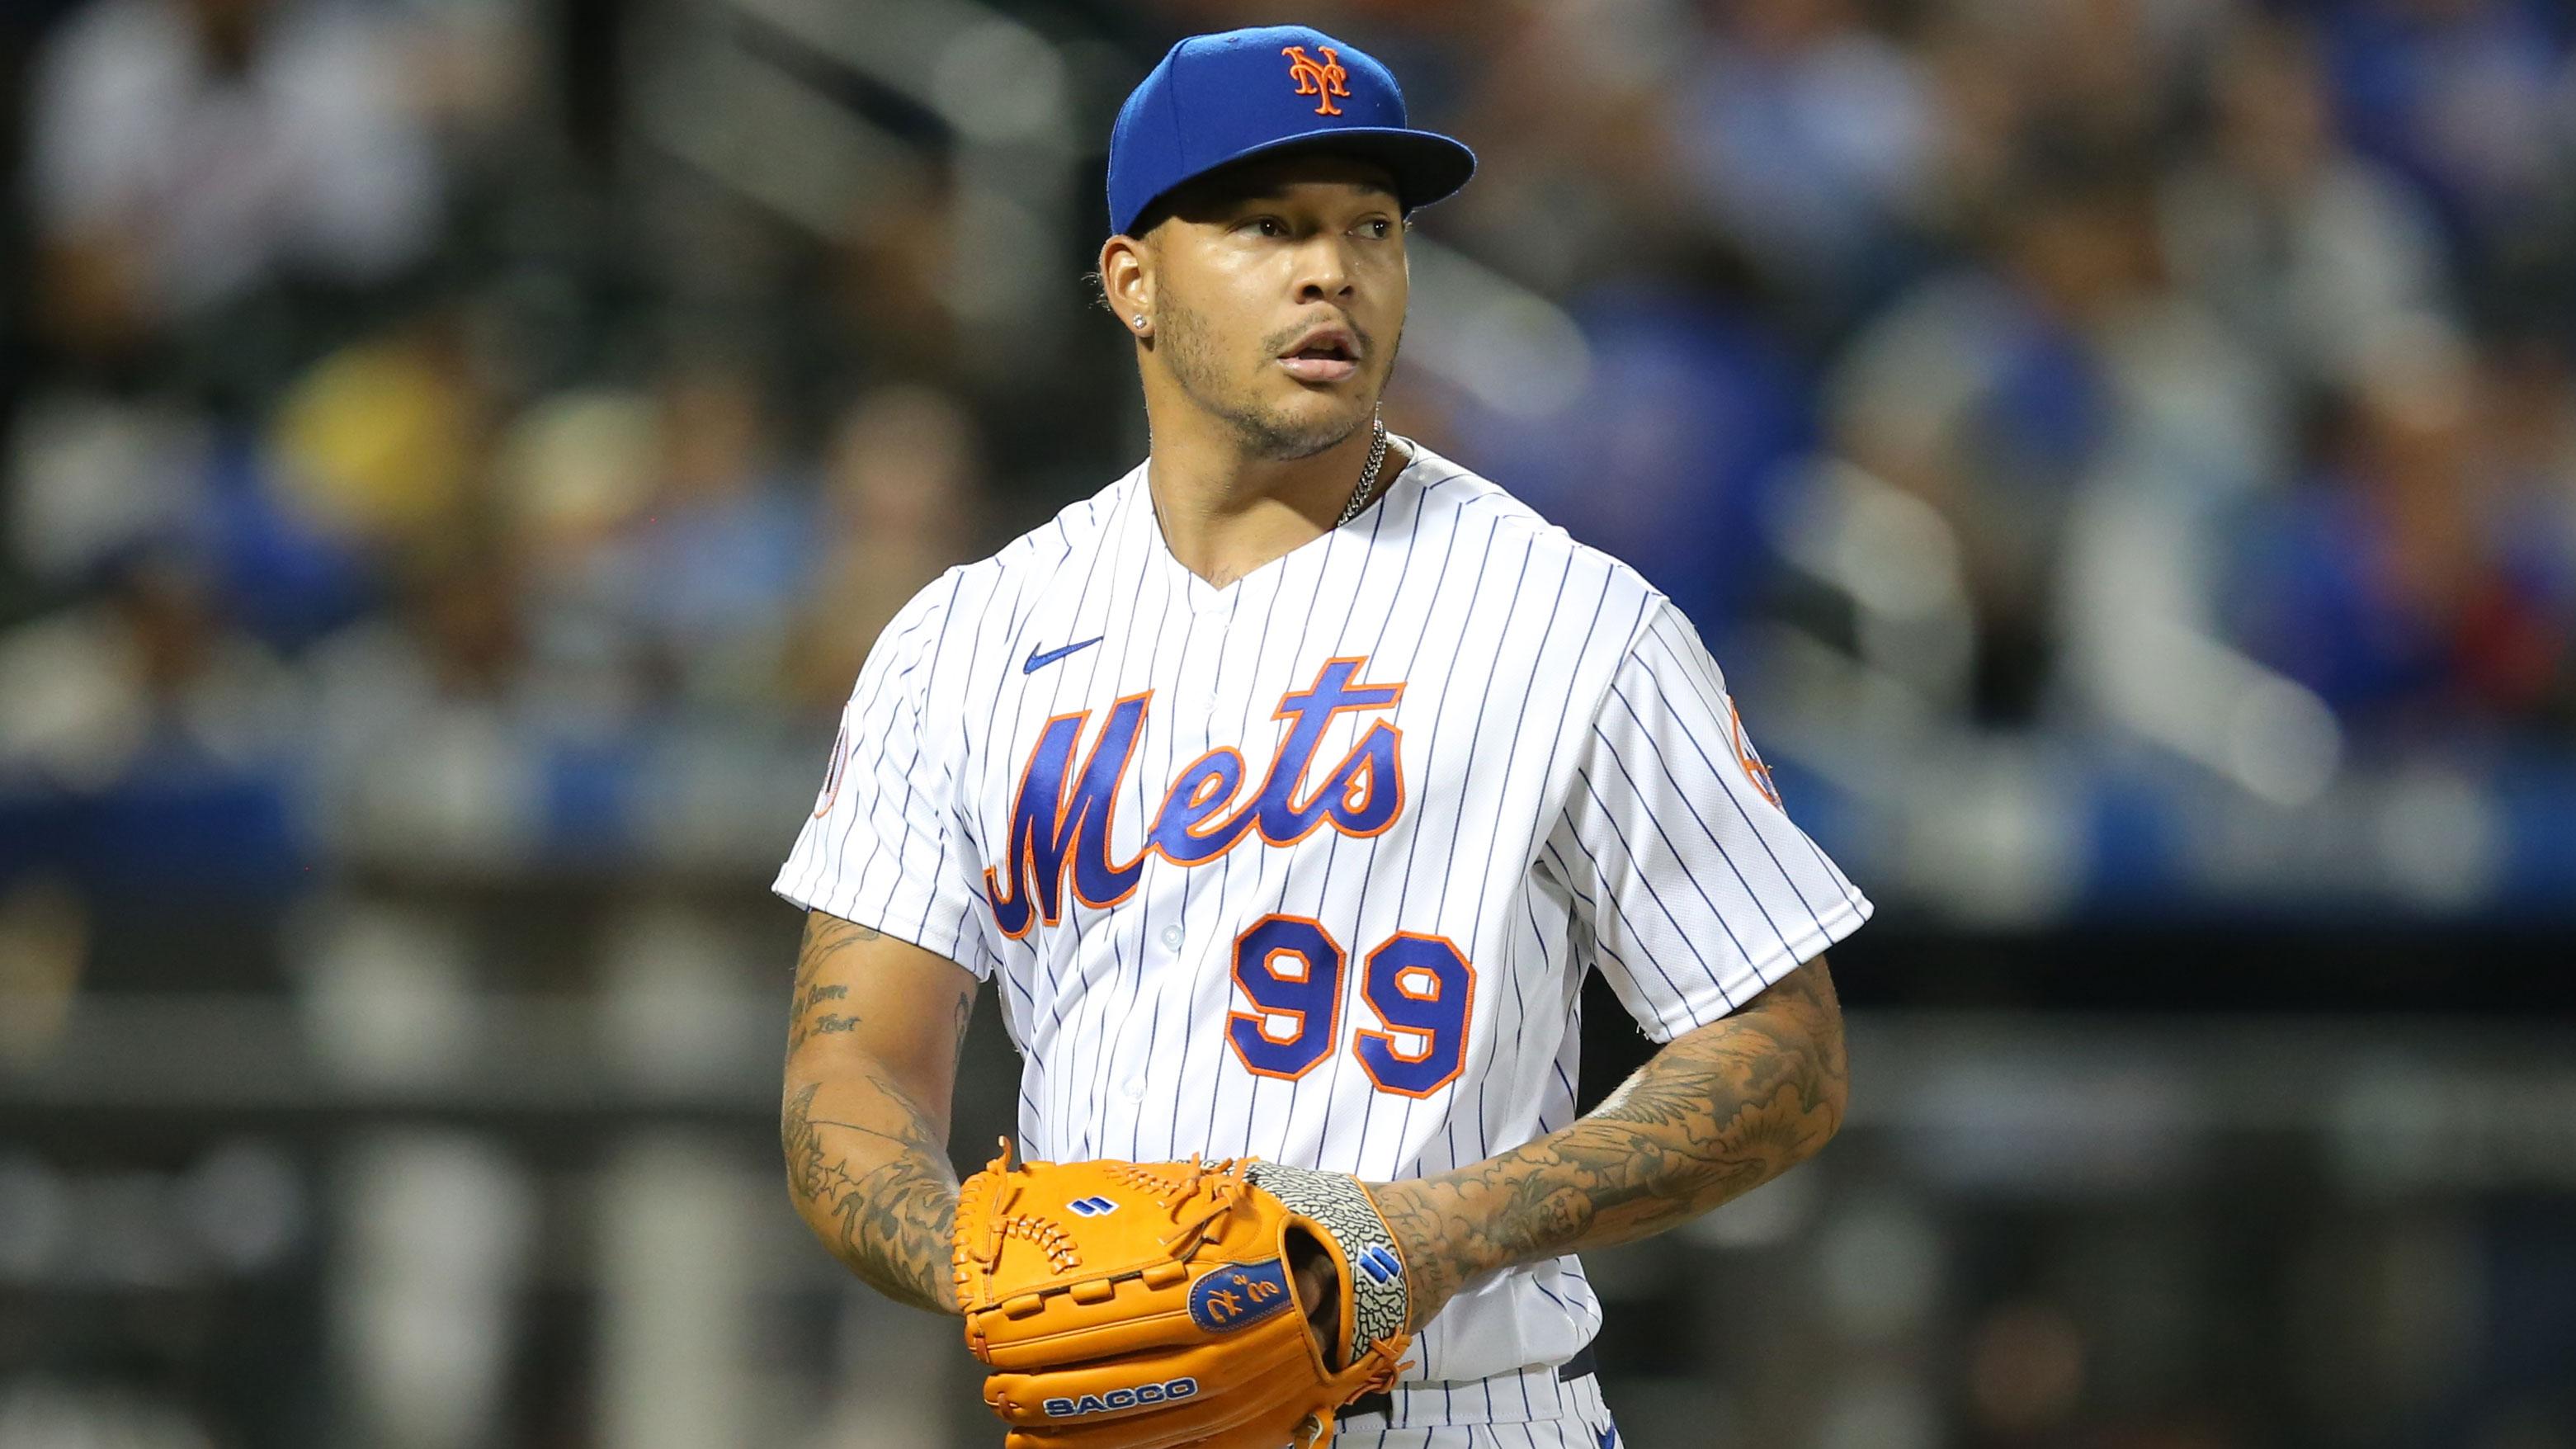 Sep 29, 2021; New York City, New York, USA; New York Mets starting pitcher Taijuan Walker (99) walks off the field after the top of the sixth inning against the Miami Marlins at Citi Field. / Brad Penner-USA TODAY Sports